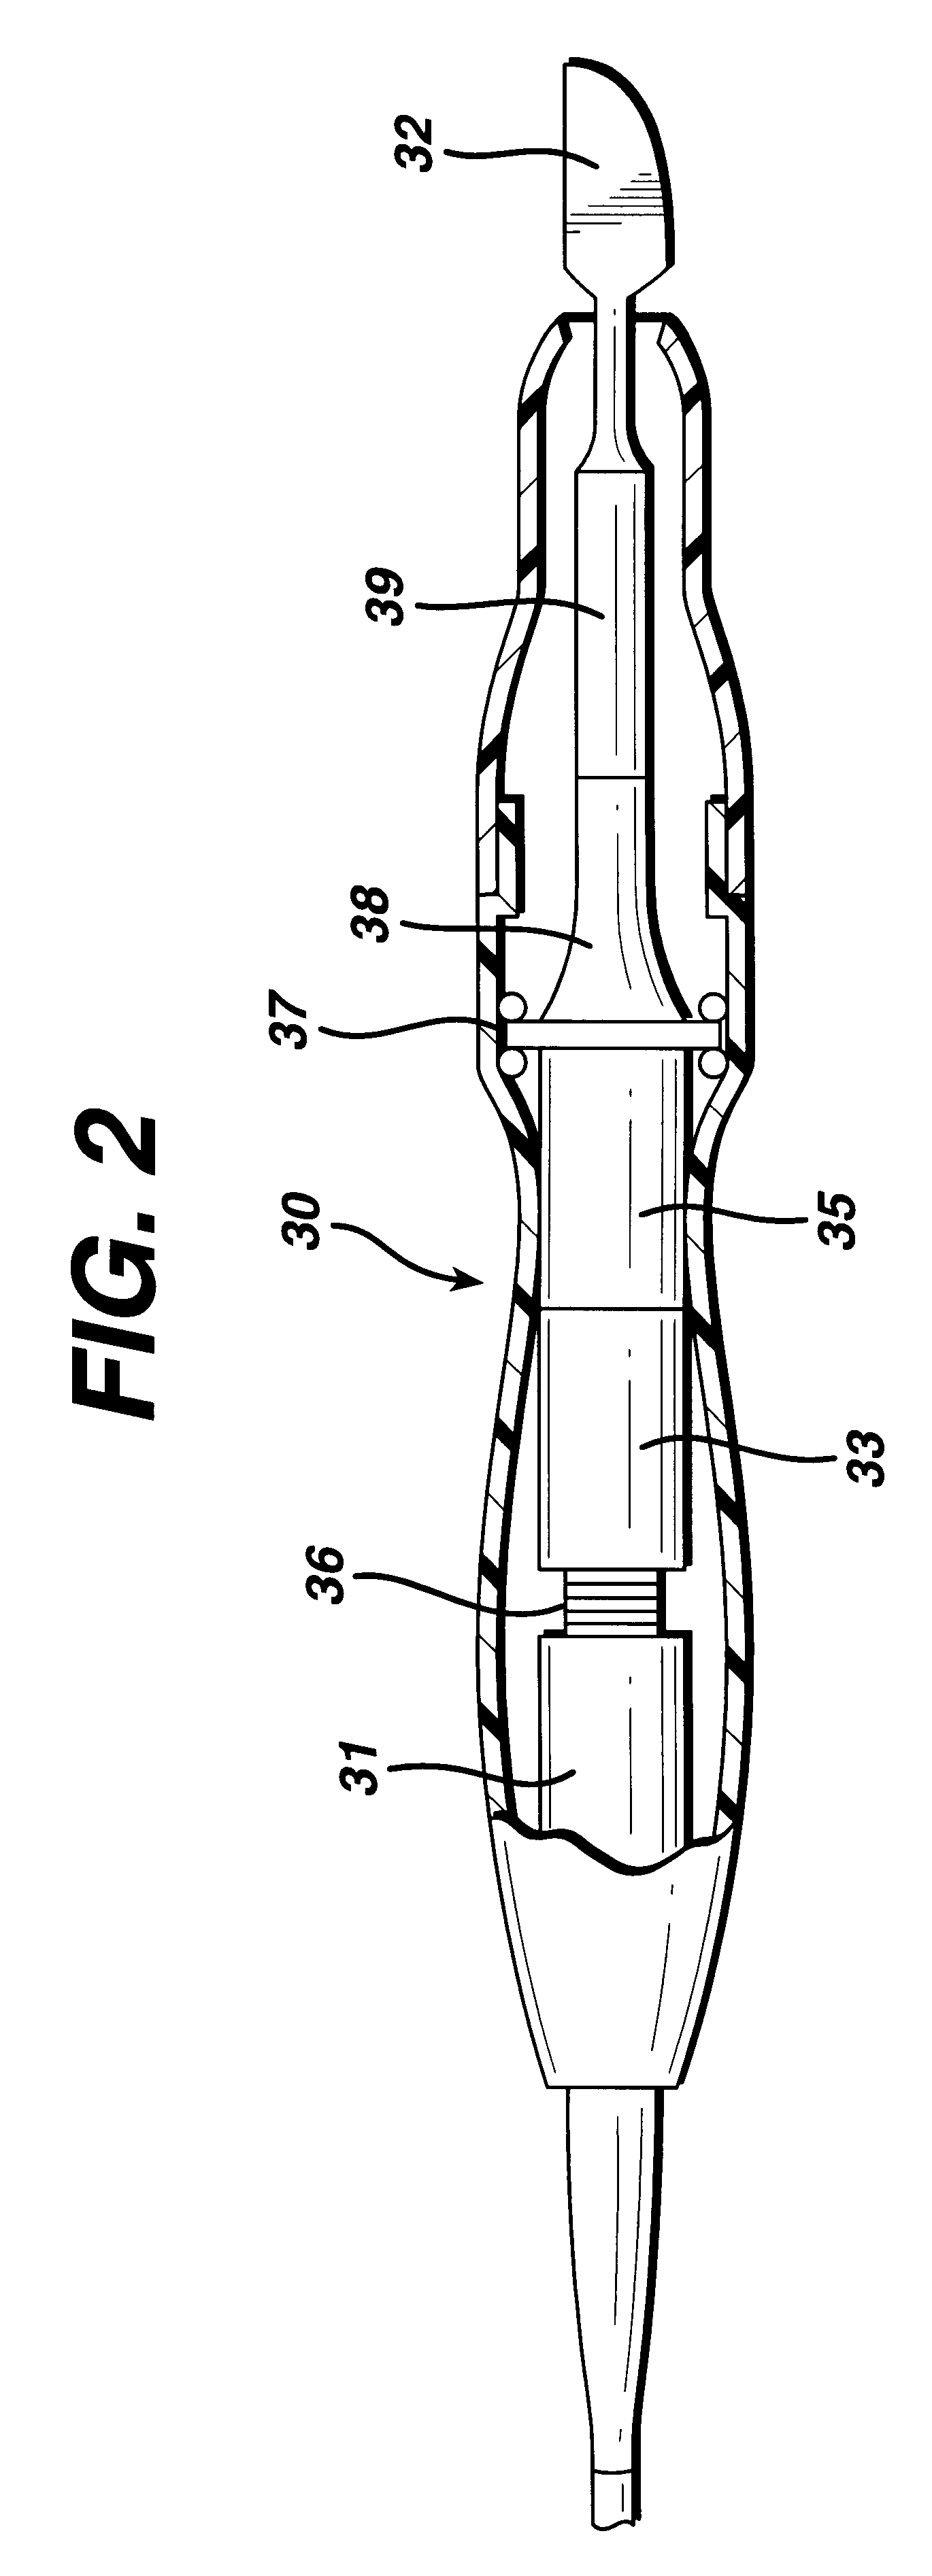 Method for detecting transverse mode vibrations in an ultrasonic hand piece/blade